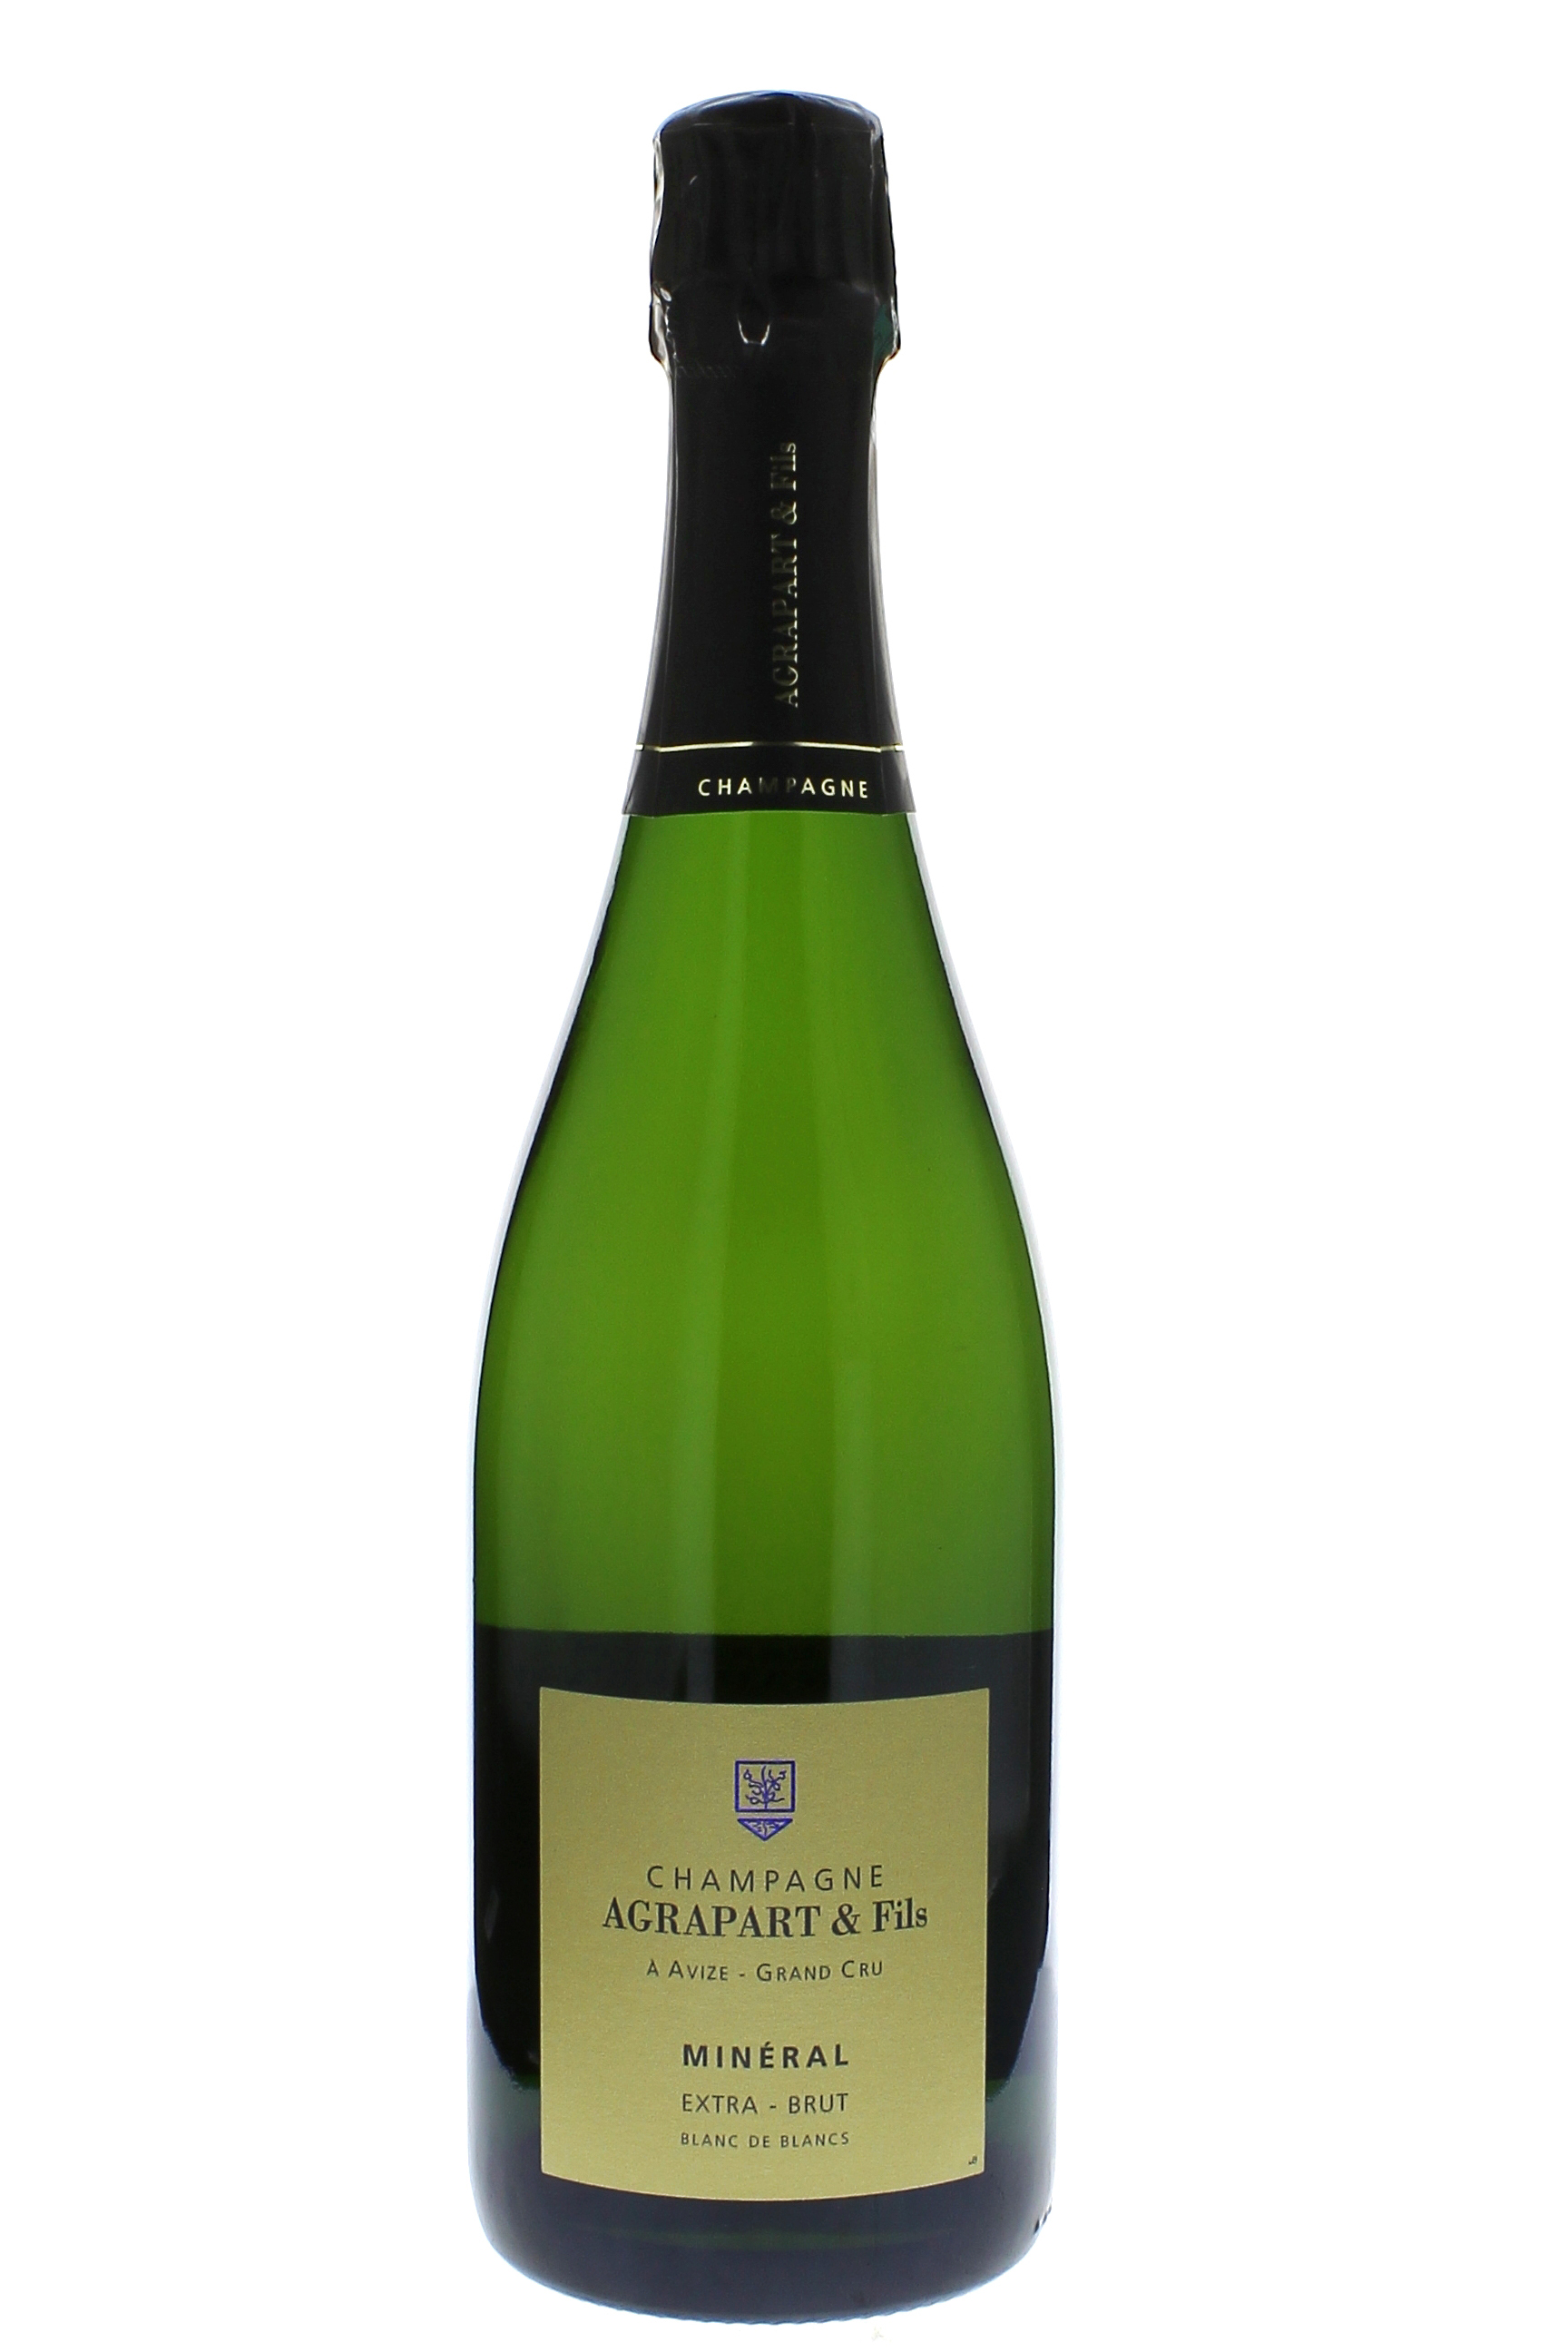 Agrapart  mineral extra brut 2008  Champagne, Agrapart